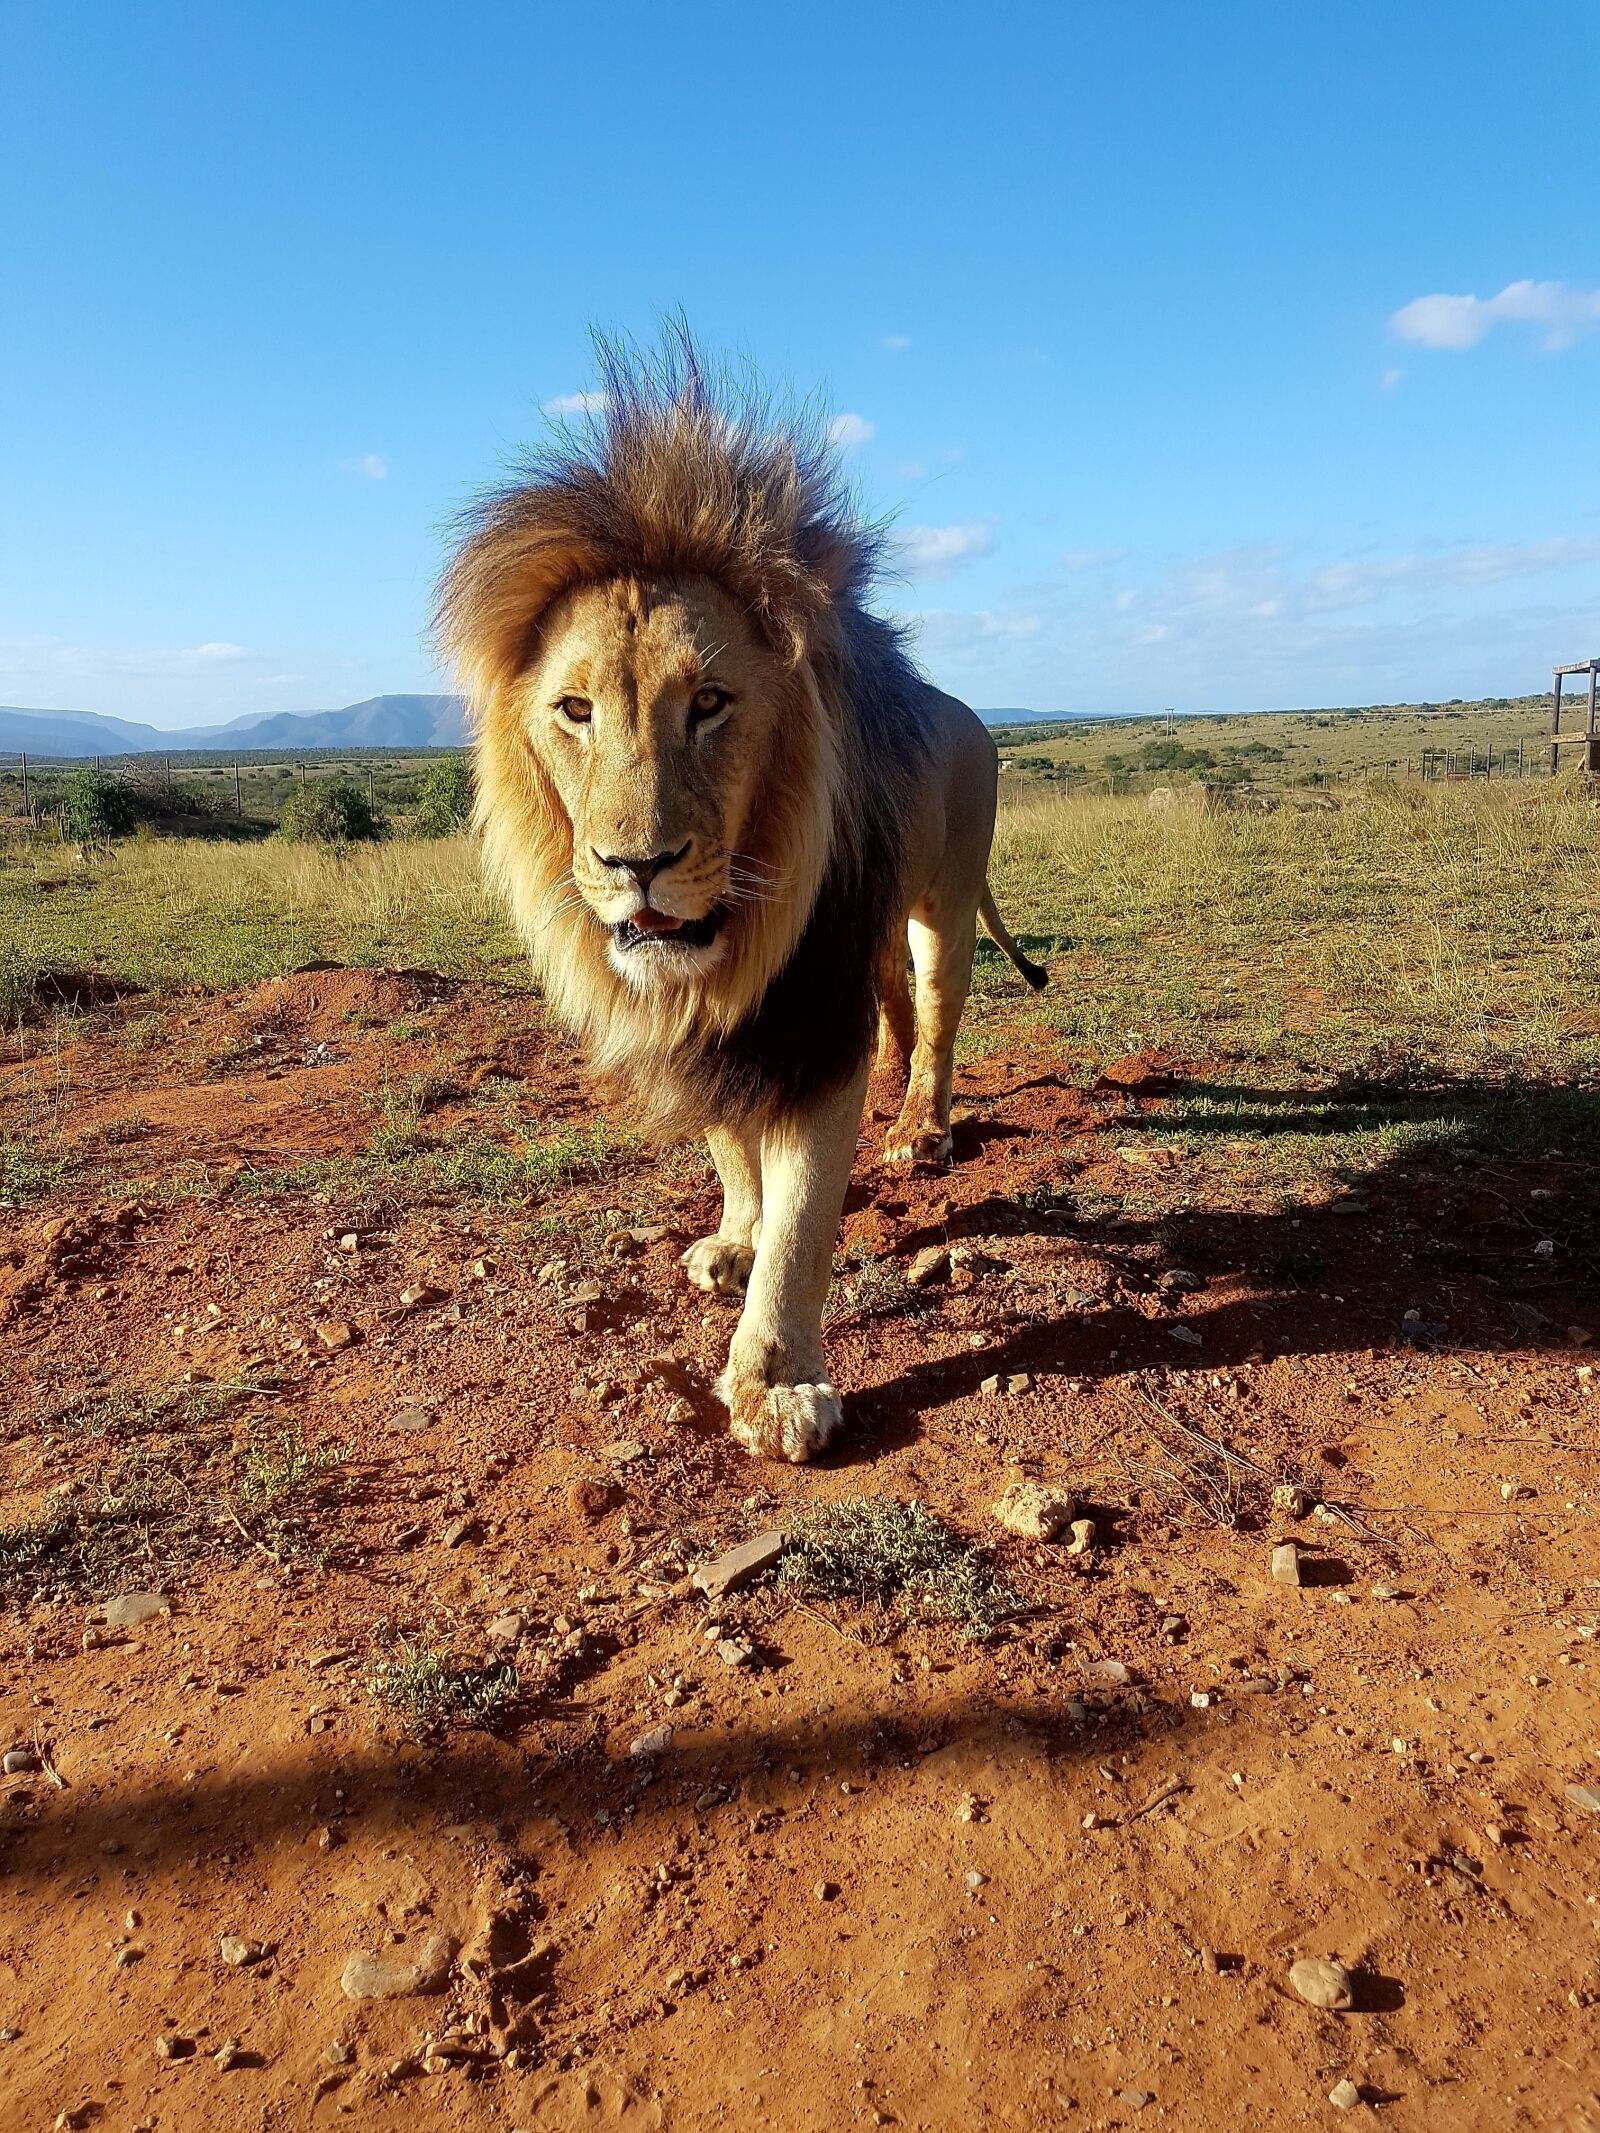 Samsung Galaxy S7 sample photo. Lion, south africa, mane photography